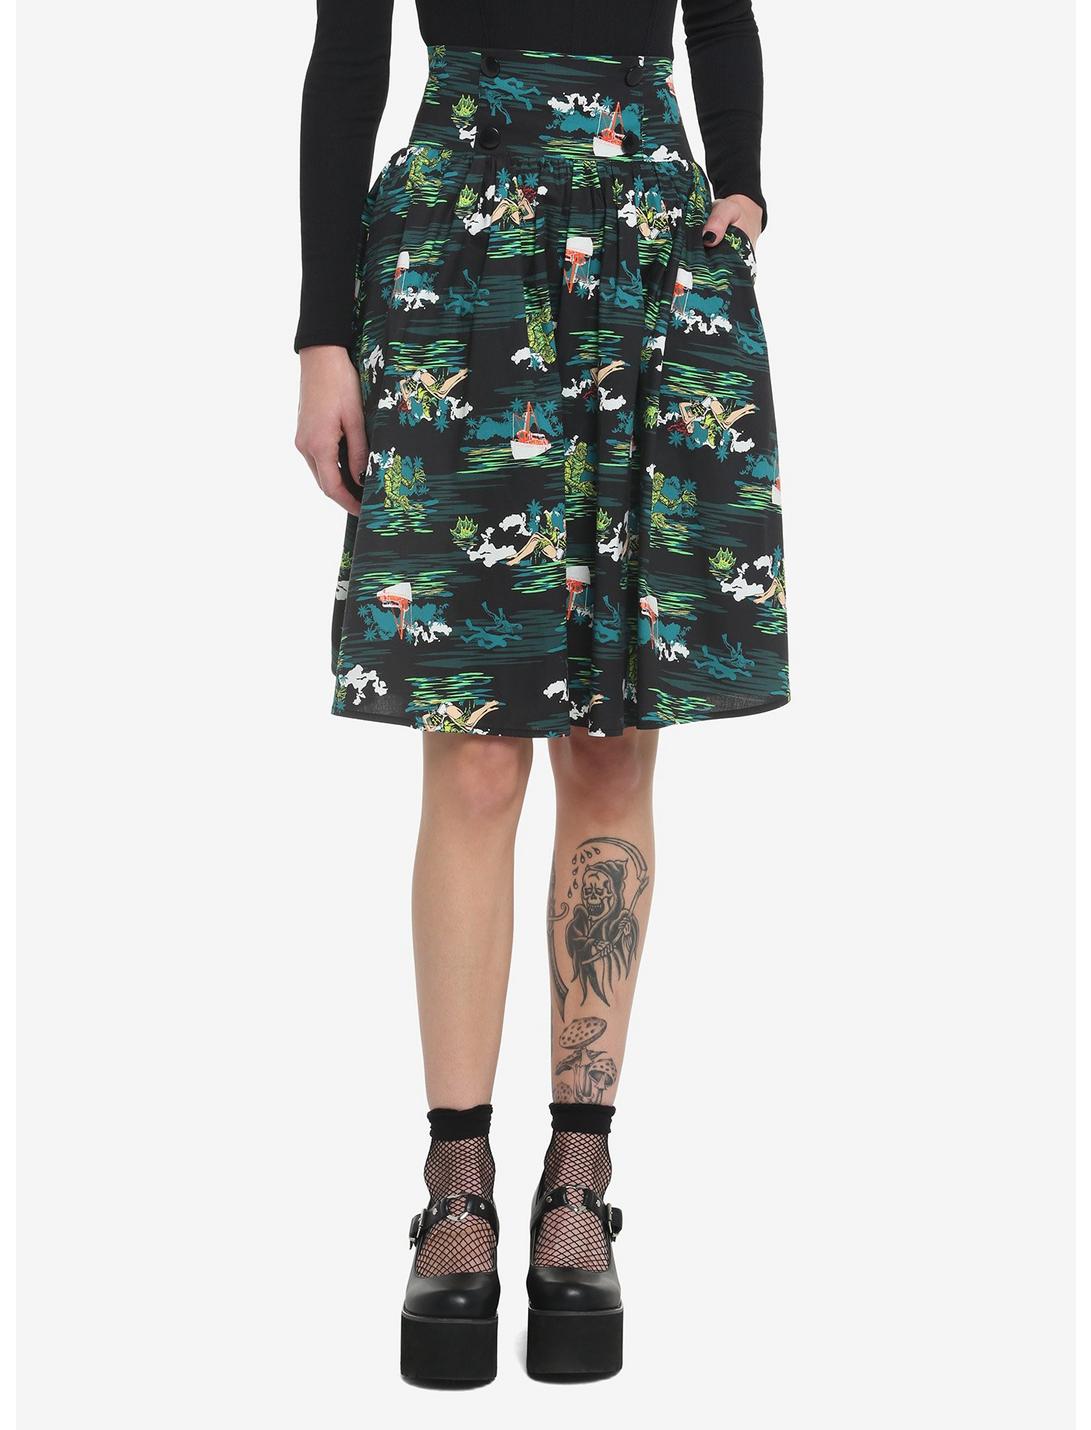 Universal Monsters Creature From The Black Lagoon Allover Print Skirt, MULTI, hi-res